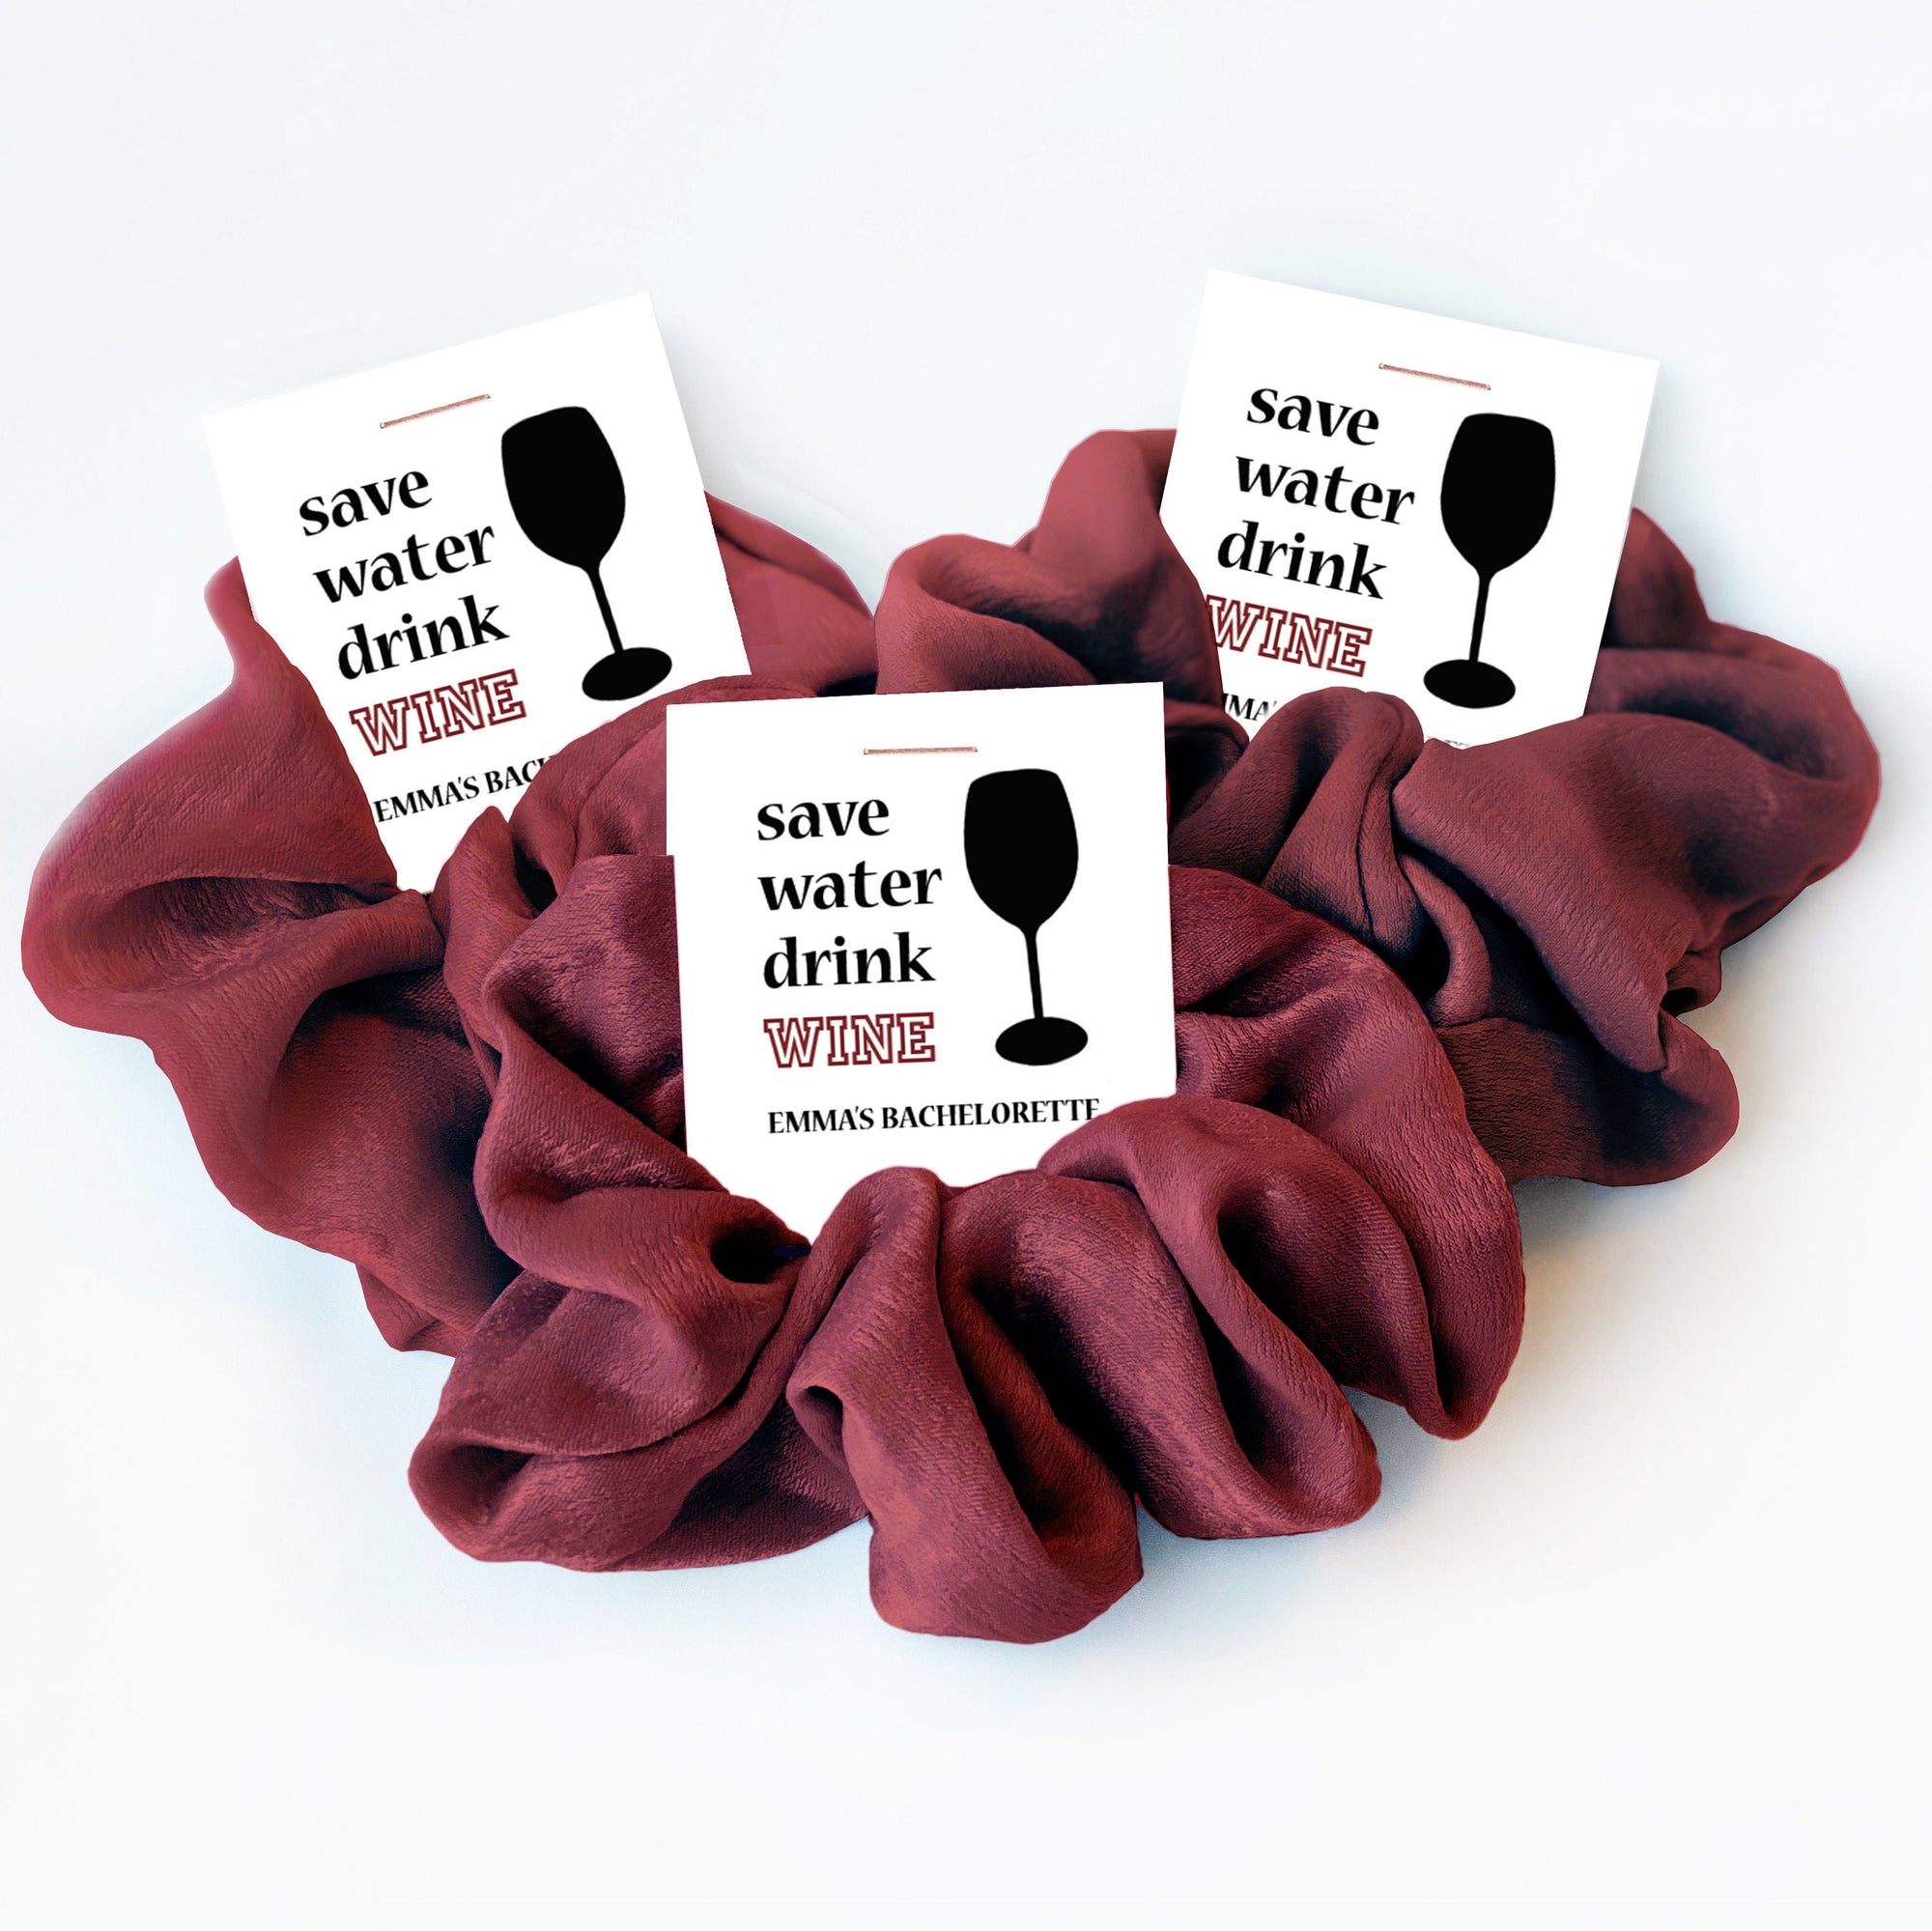 Save Water Drink Wine Bachelorette Party Favor Scrunchie Hair Ties, Personalized Bachelorette Party Favors, Wine Tasting Bachelorette